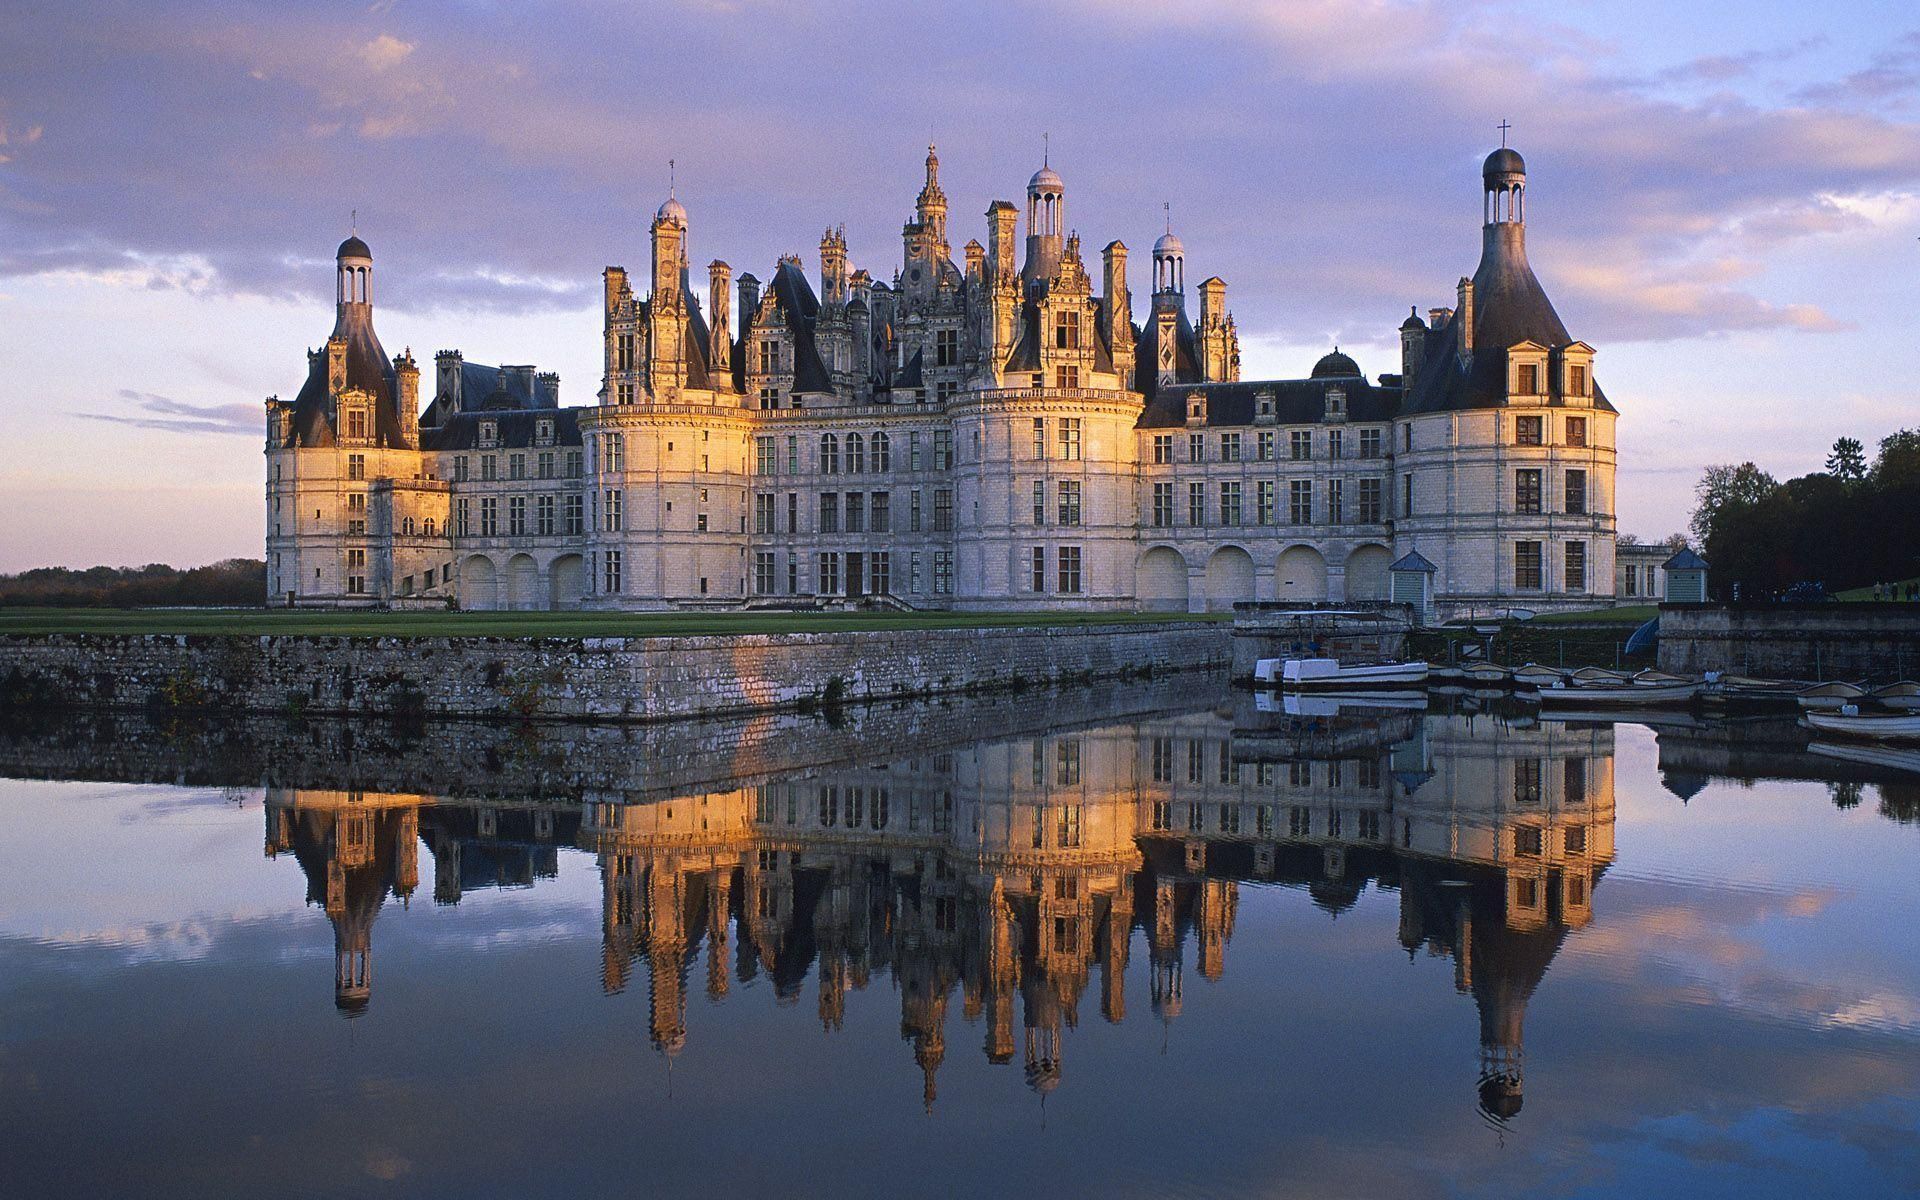 A large castle is reflected in the water - Castle